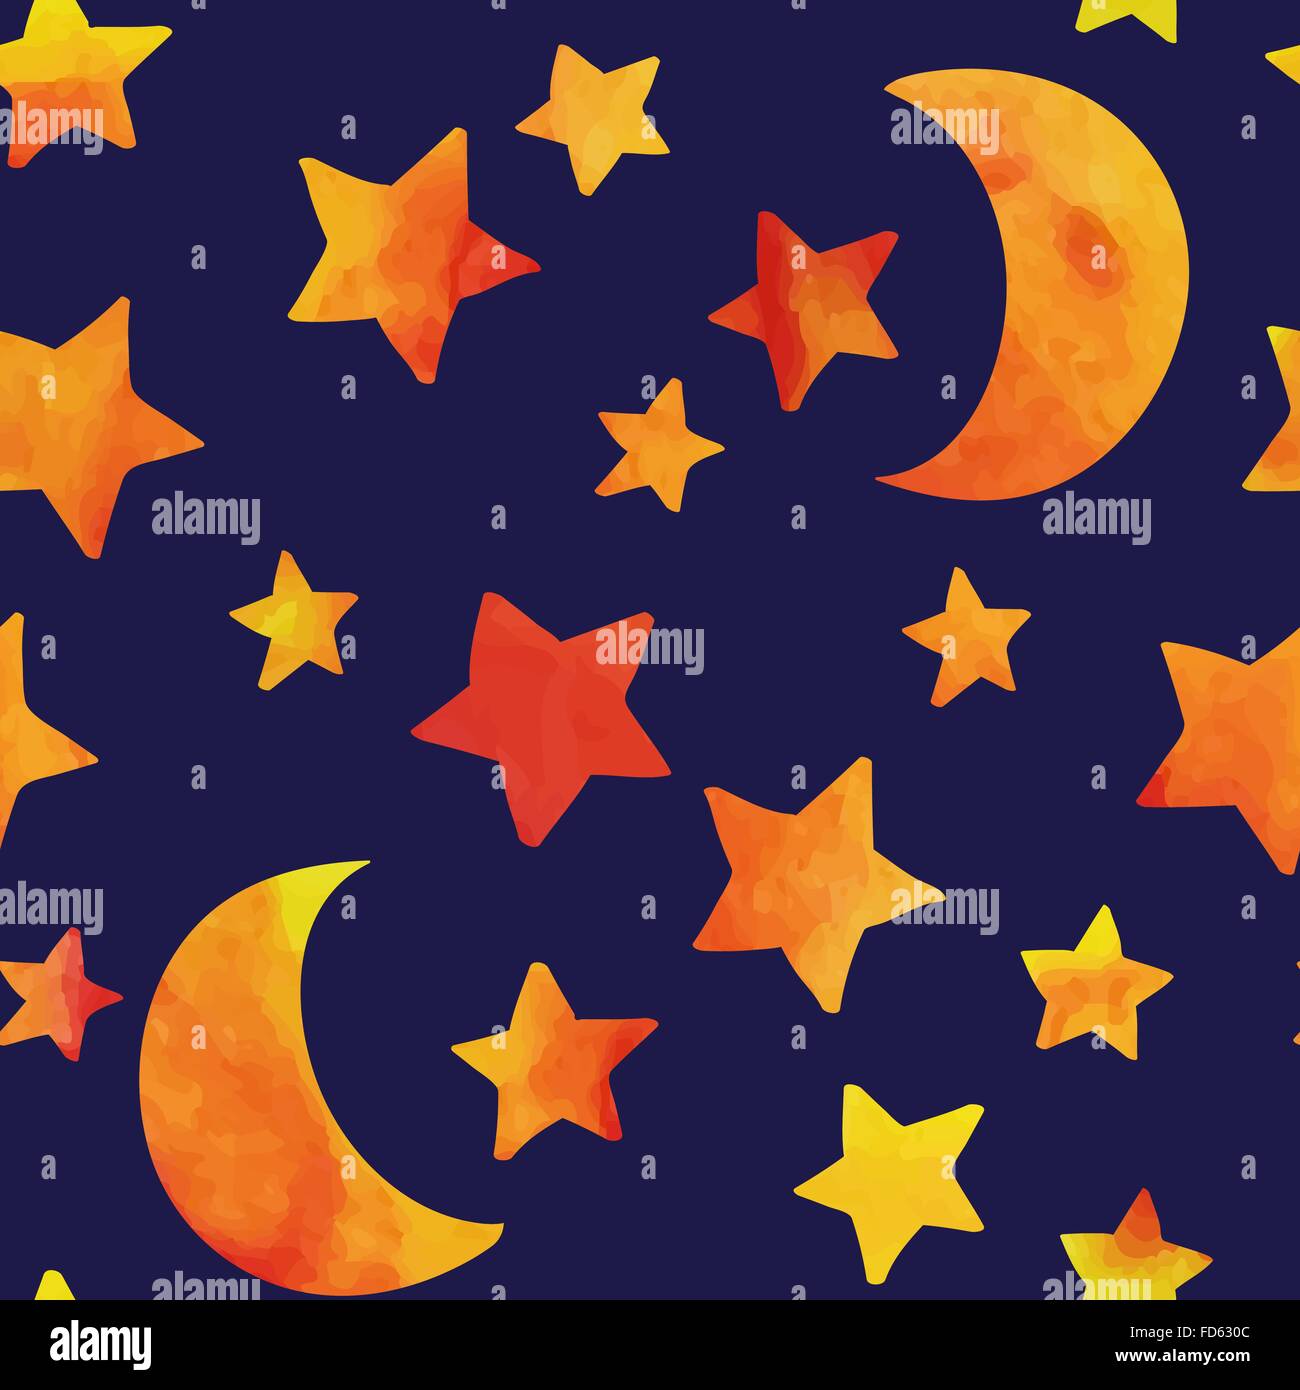 Seamless pattern with moon and stars. Watercolor effect. Vector illustration. Stock Vector